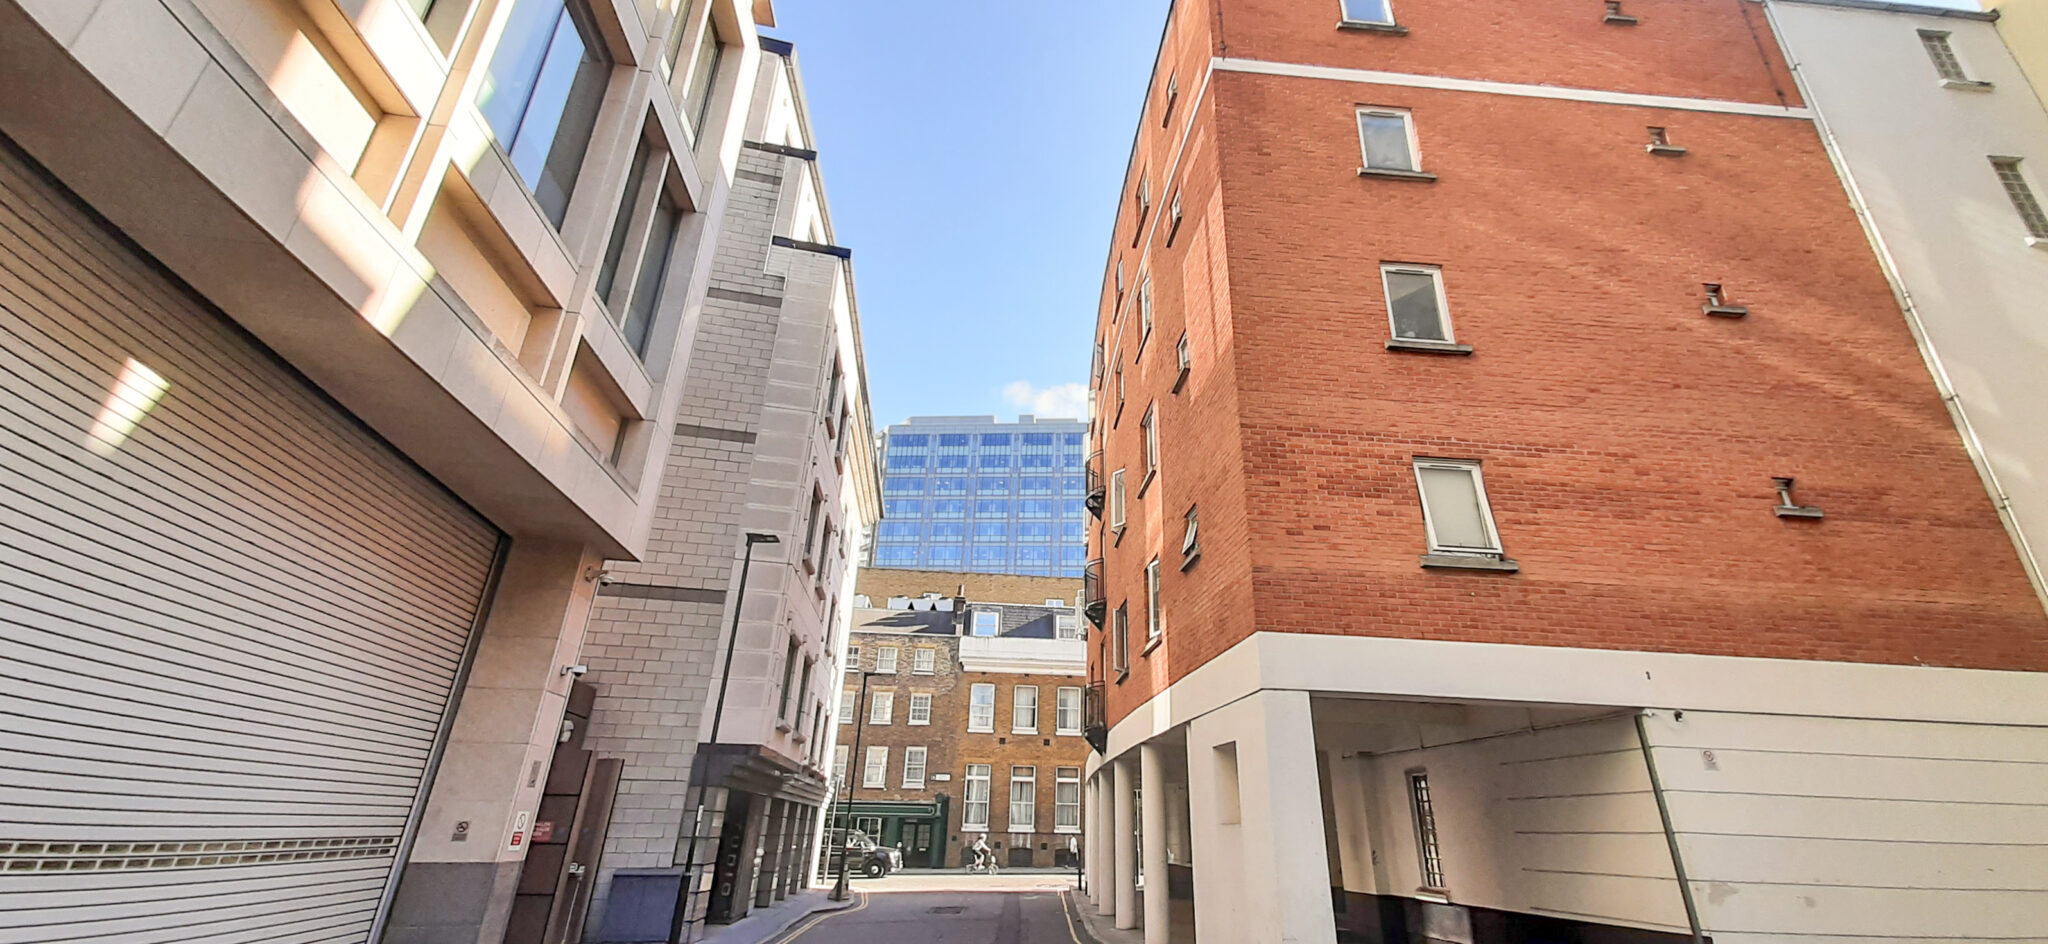 Shortlet-Moorgate-Serviced-Apartments